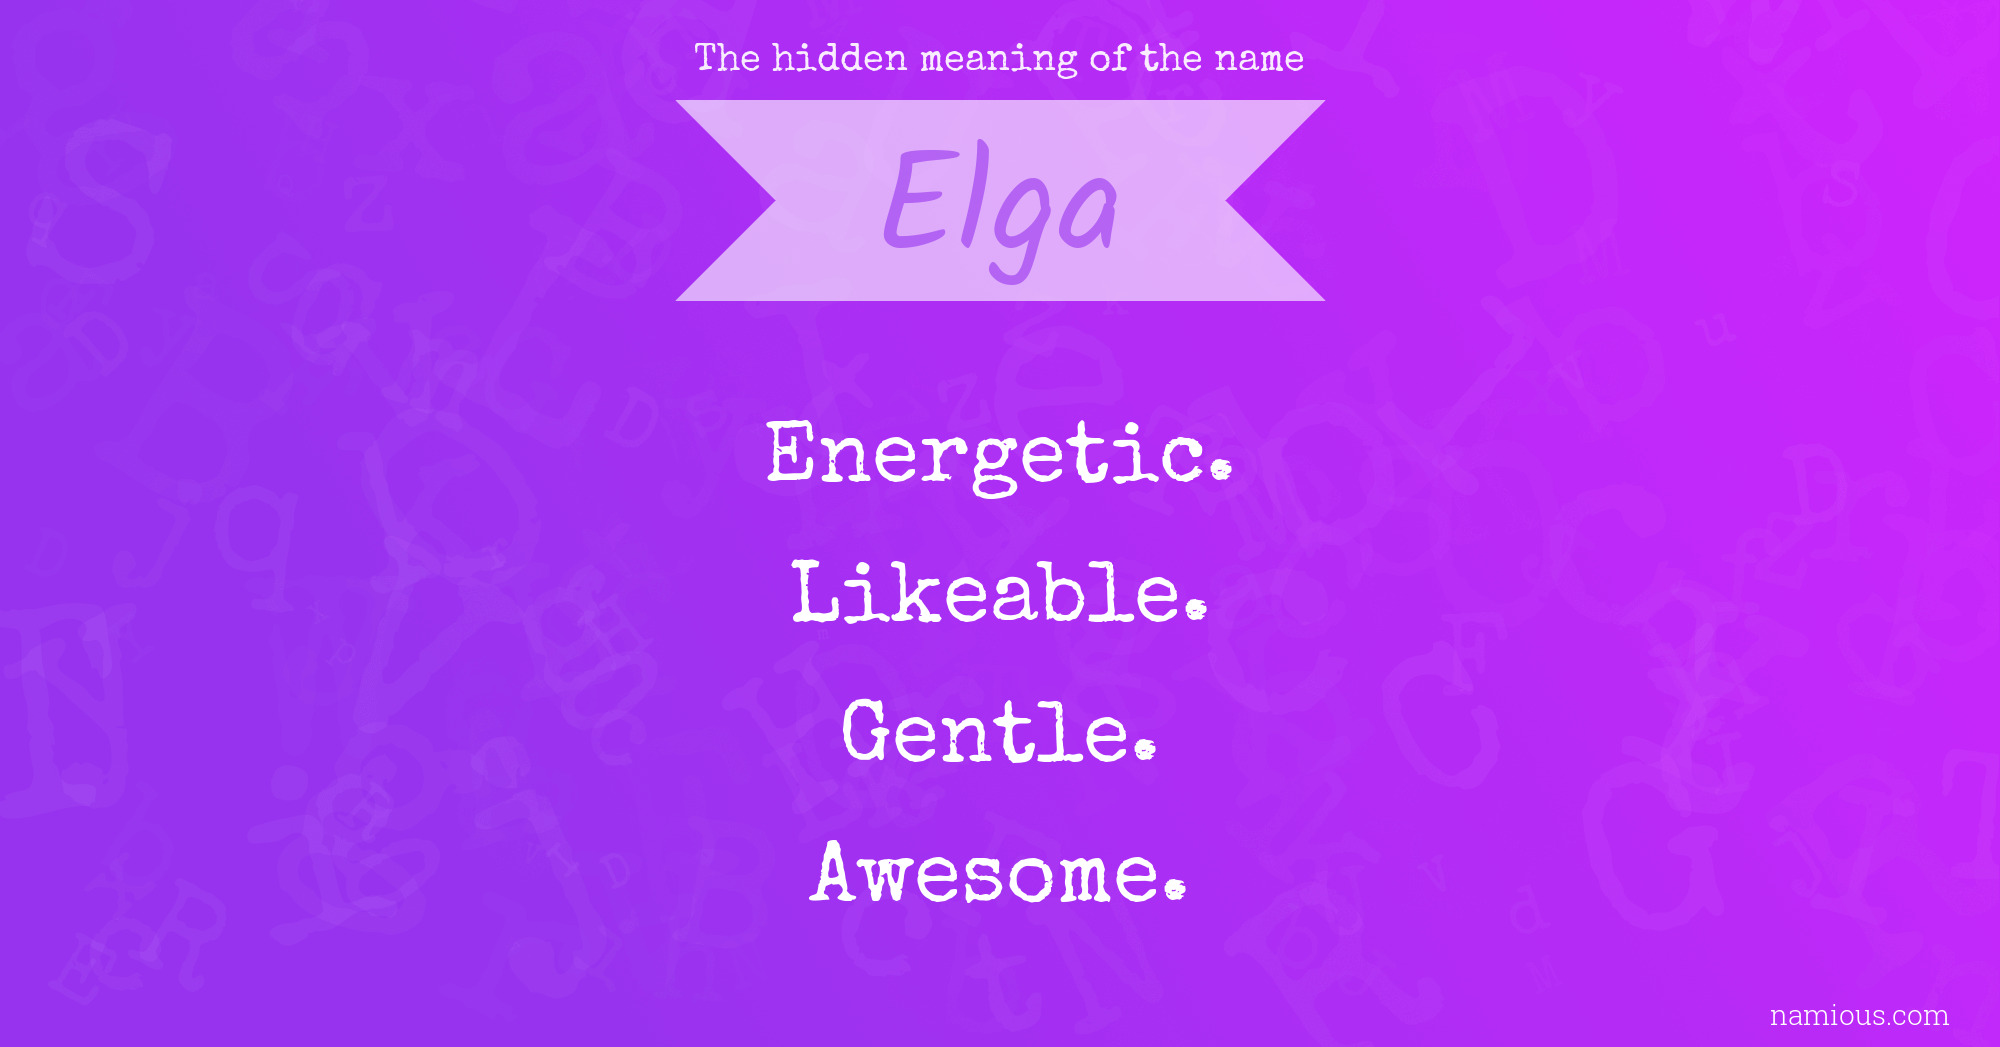 The hidden meaning of the name Elga